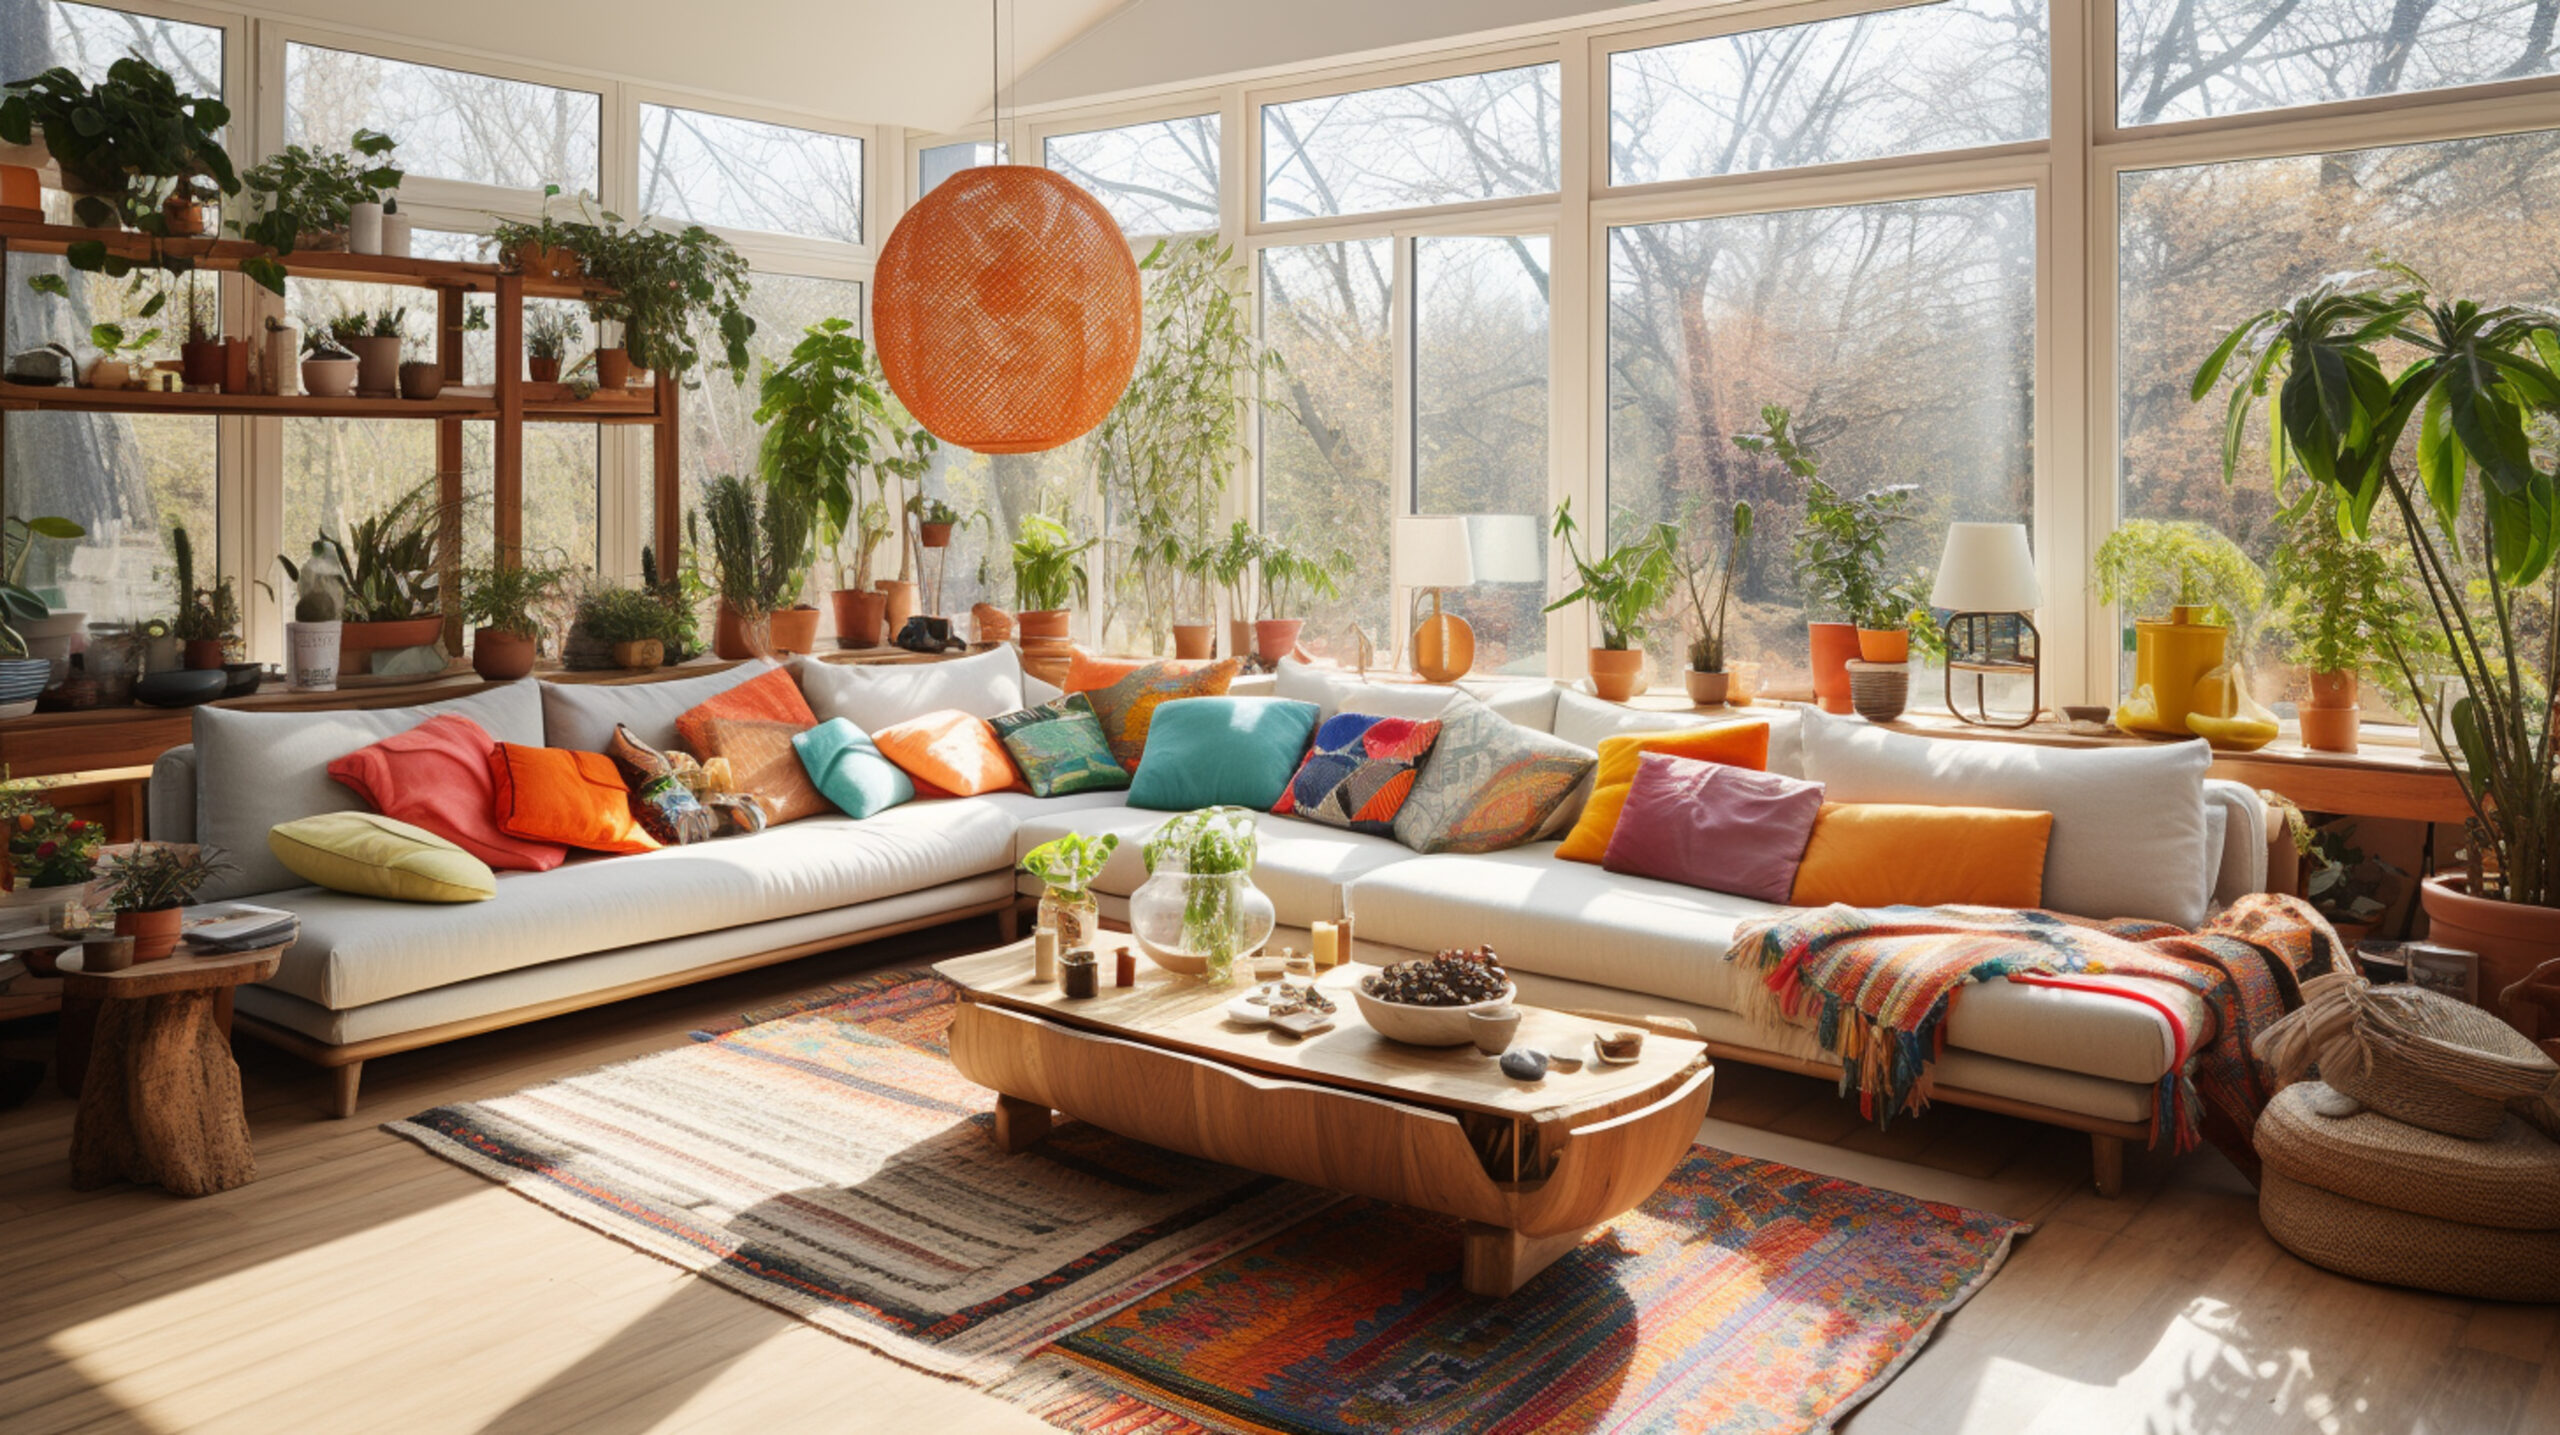 Sunroom in Massachusetts filled with colorful plants and furnishings